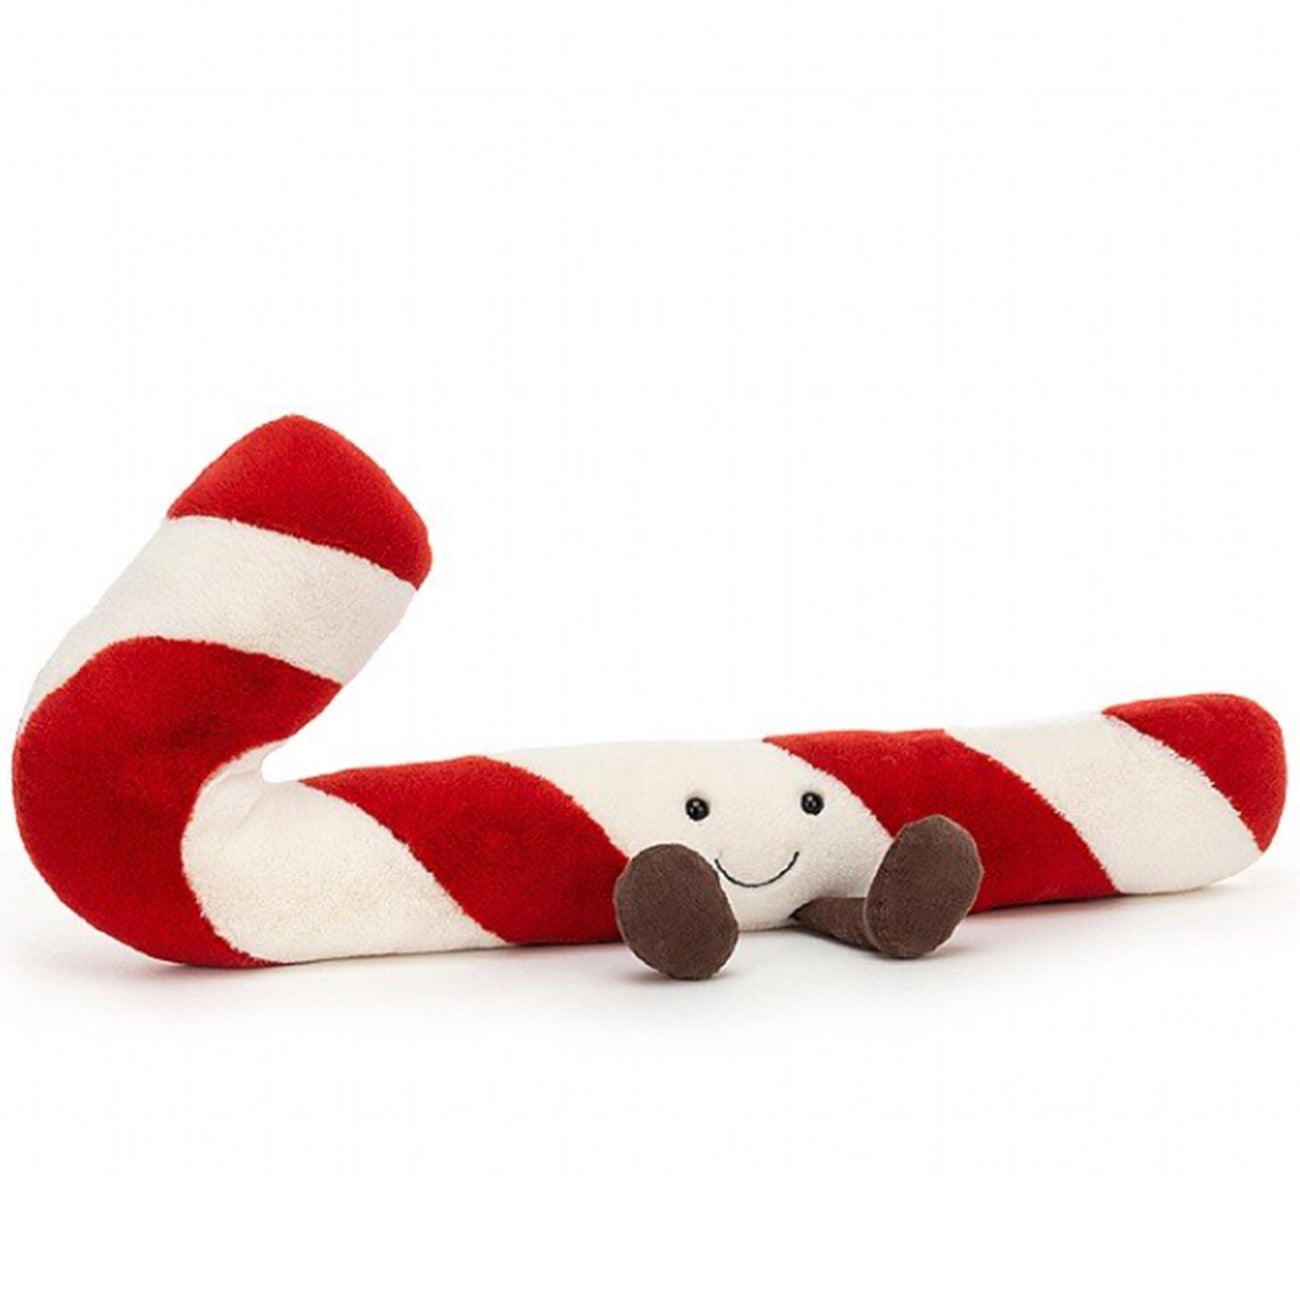 Jellycat Large Candy cane, 55 cm